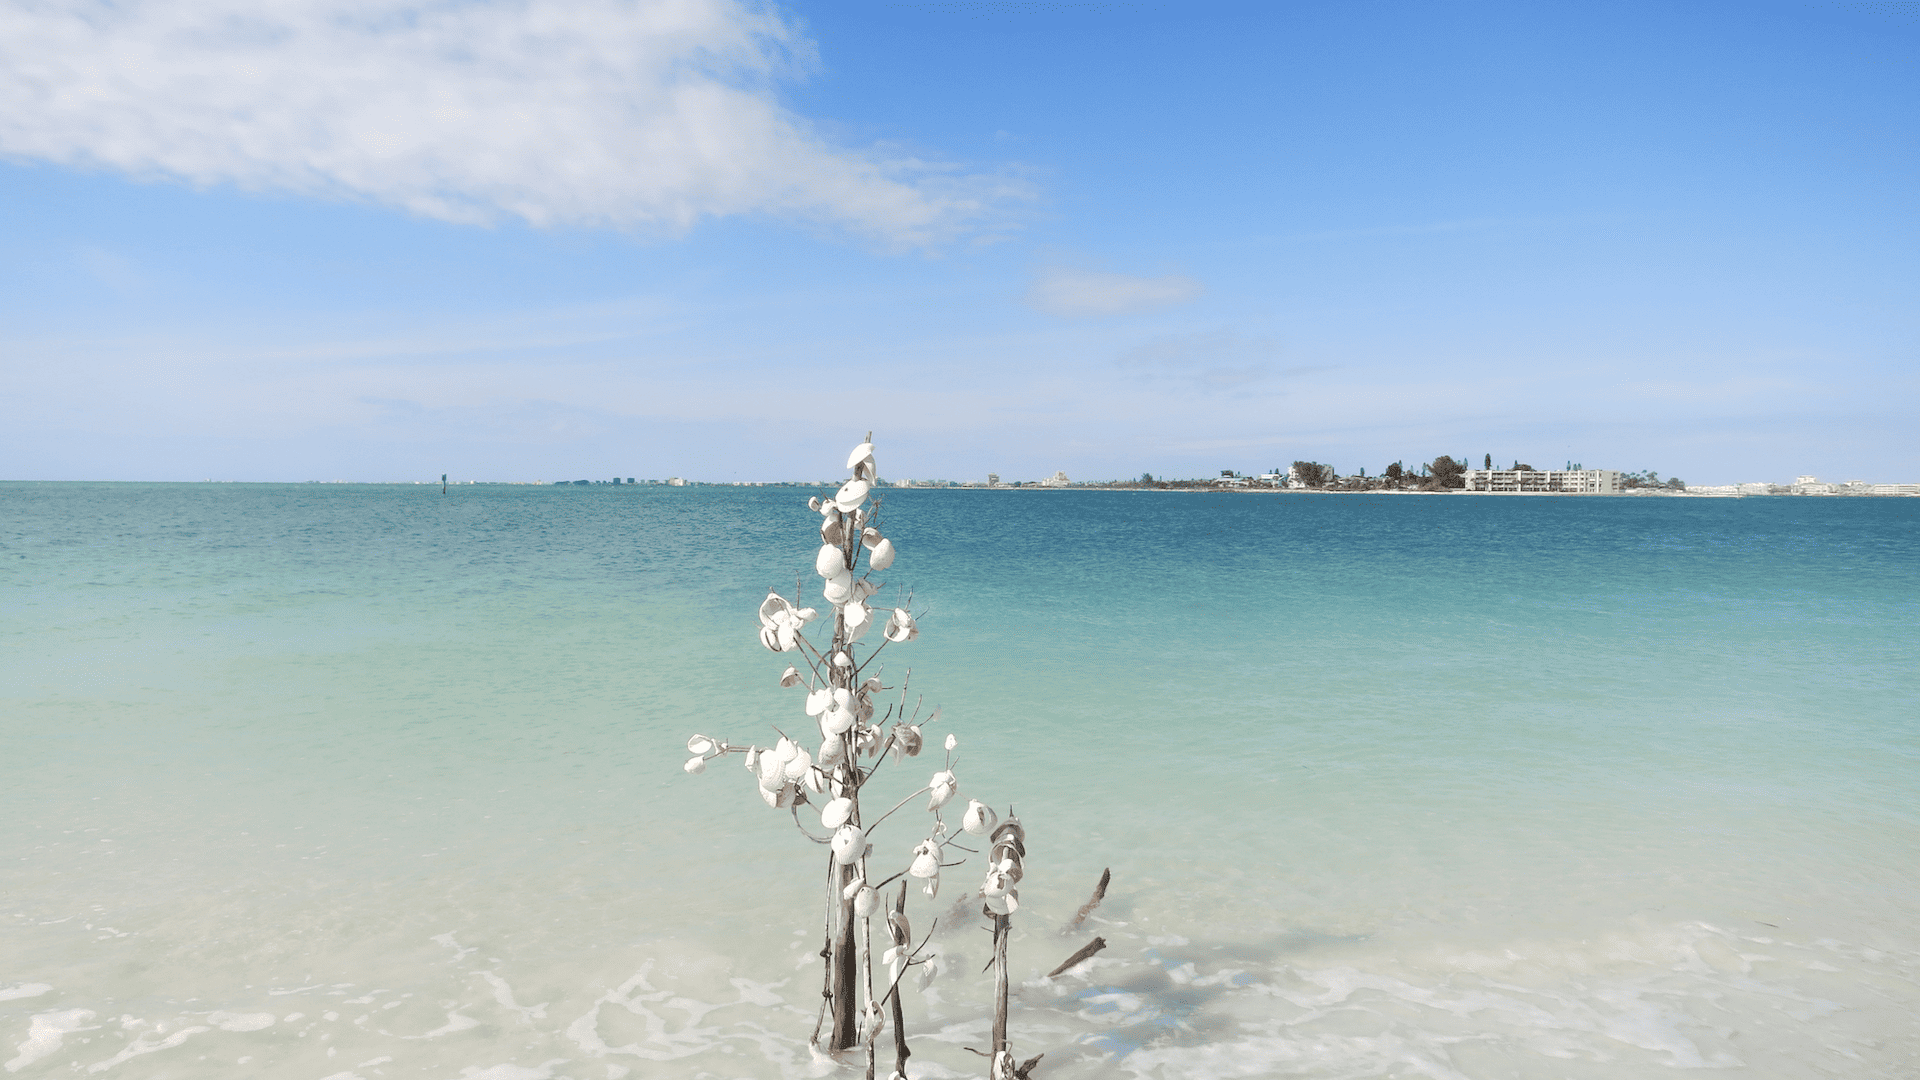 shell-key-named-one-of-the-best-secret-beaches-in-the-us-that-s-so